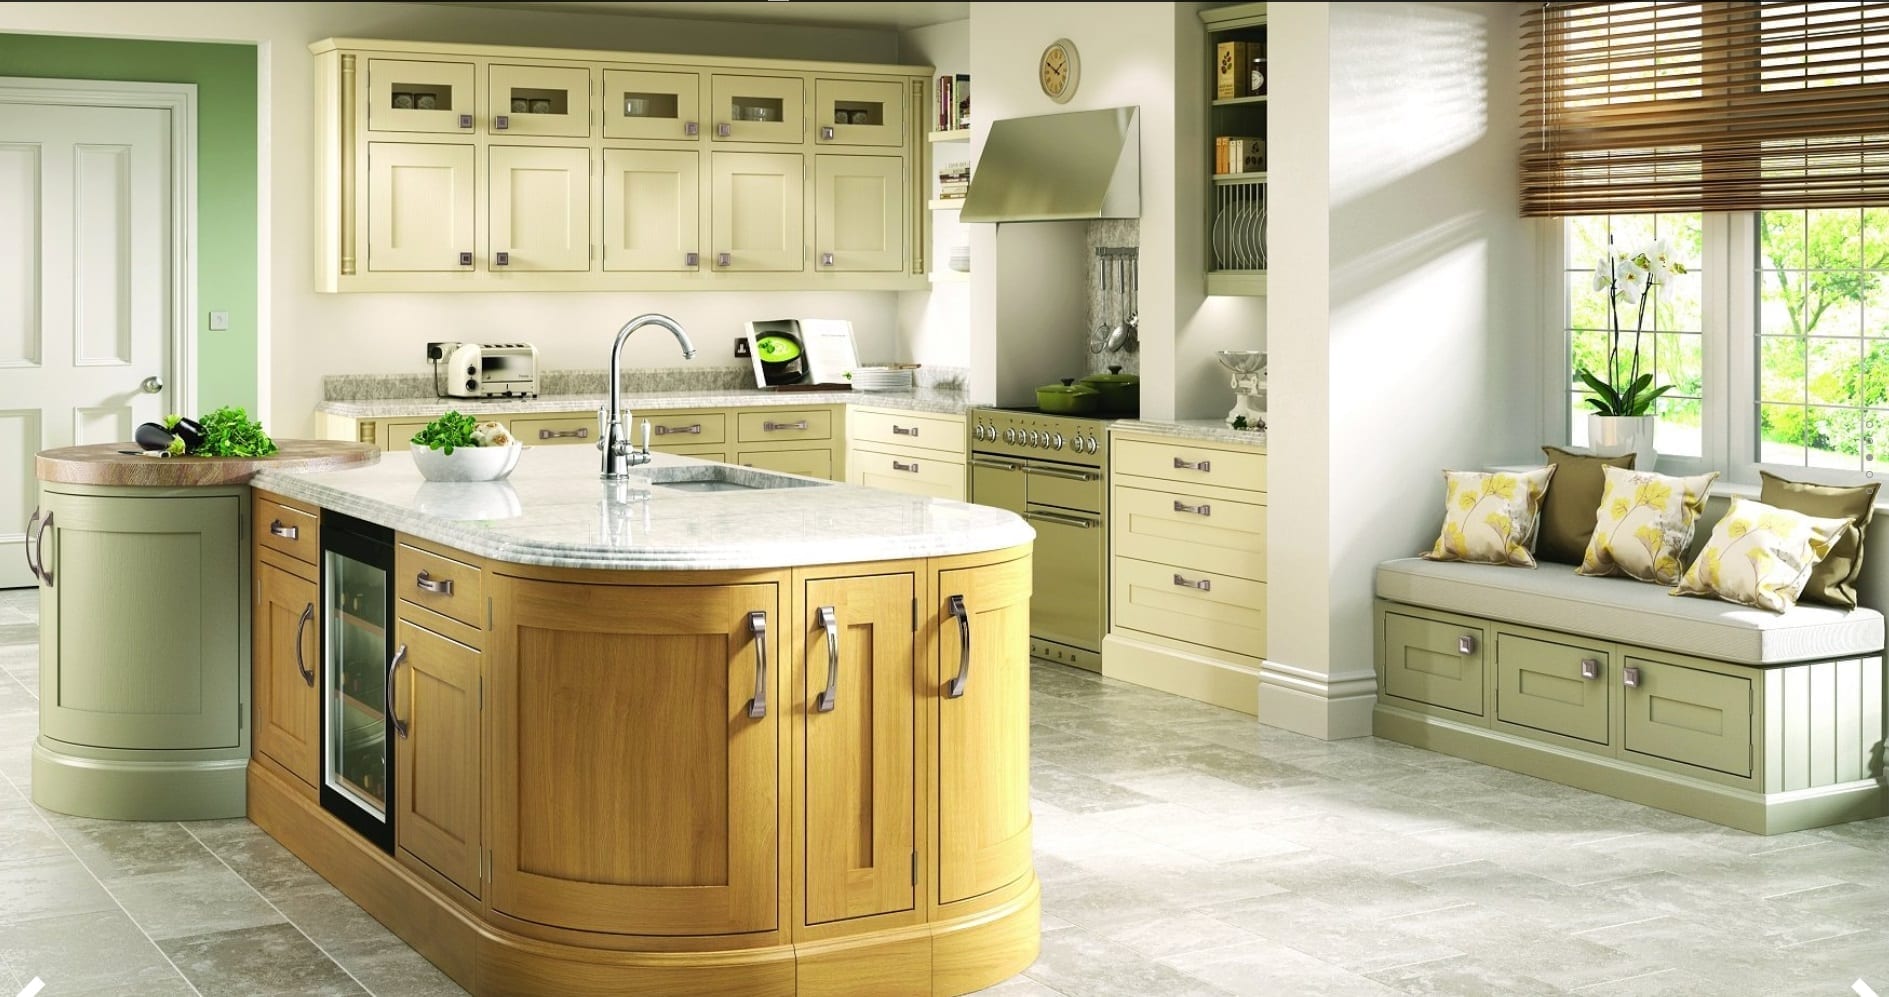 Luxury traditional inframe kitchens